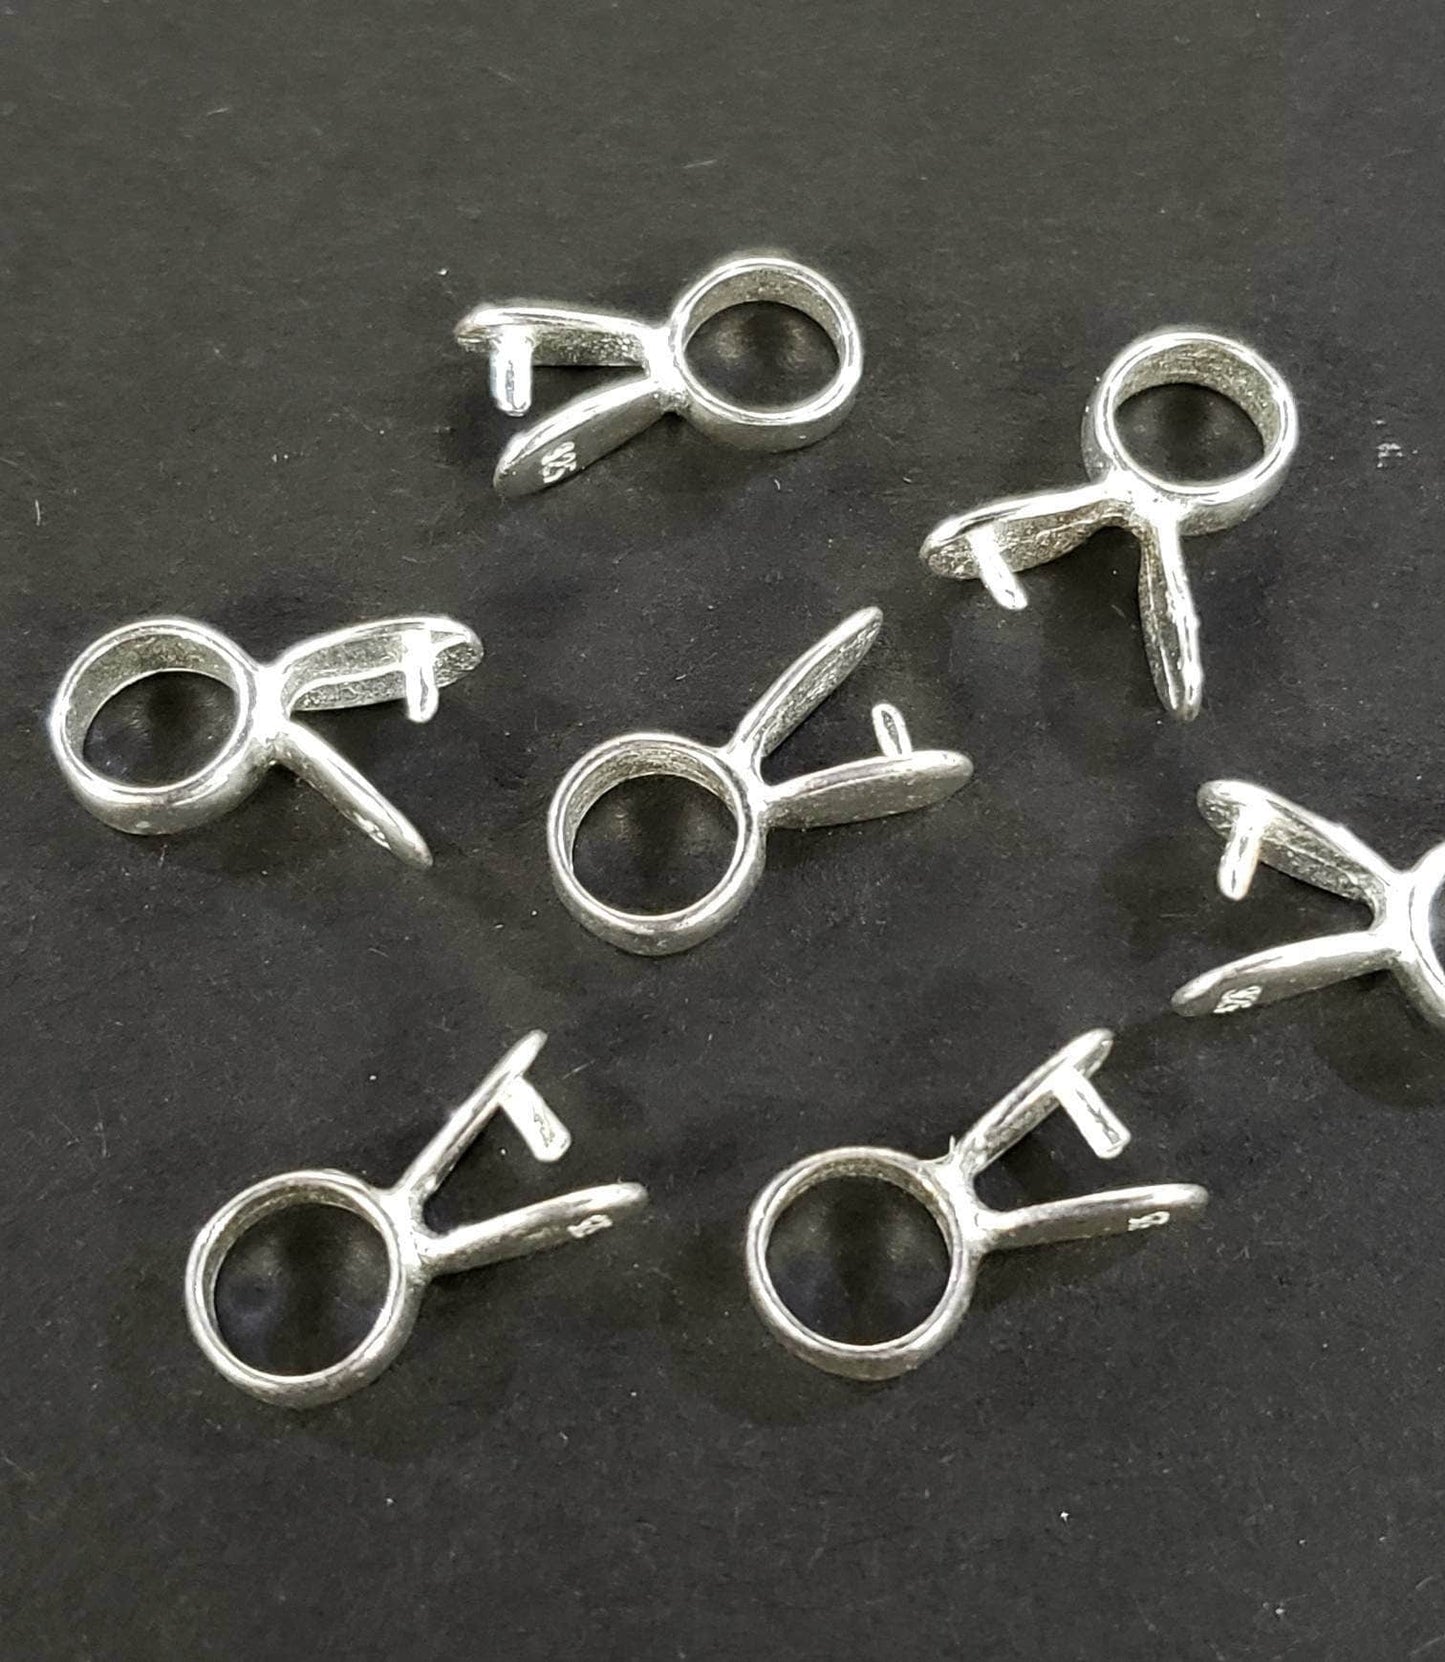 2 Pcs 925 Sterling Silver 6x12mm pinch bail pendant holder, Jewelry making supplies. 2 pieces bails only